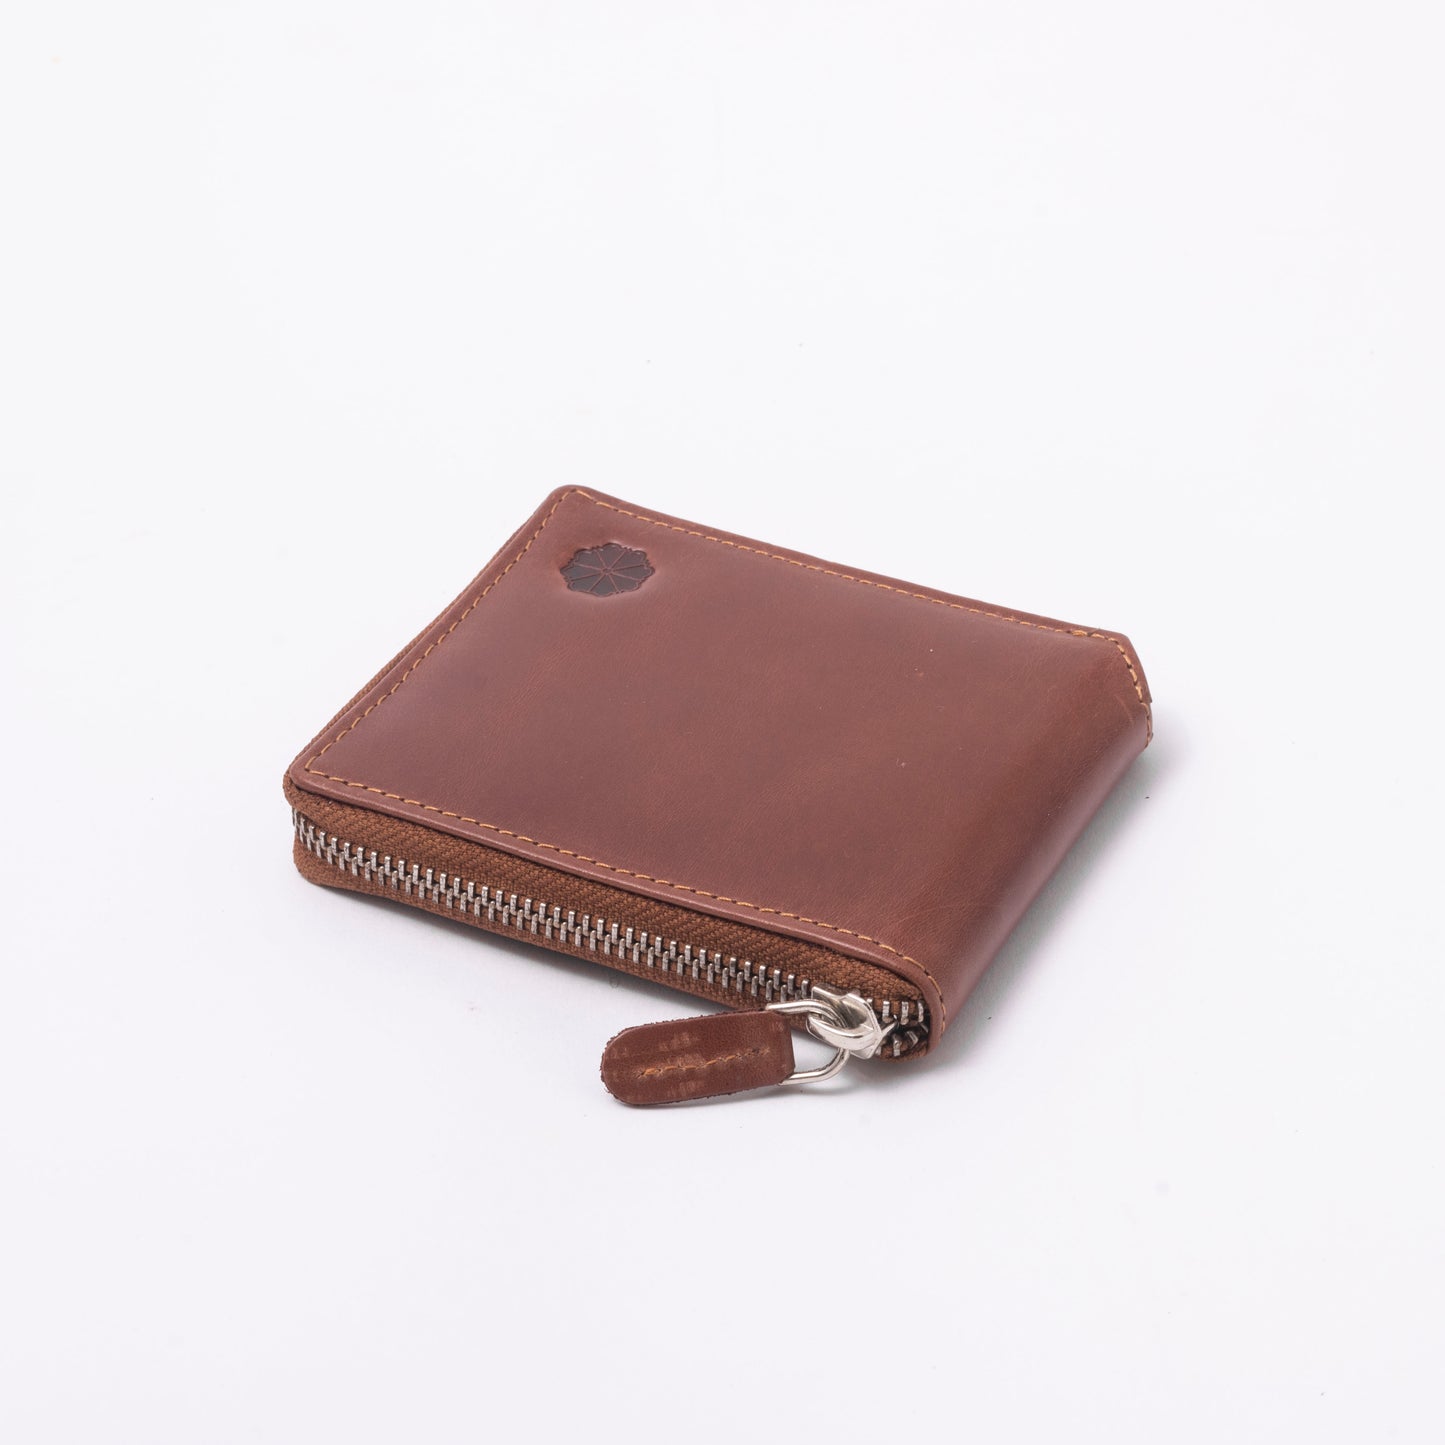 Cordobano Men's RFID Zip Around Wallet - Compact Bifold with 3 Card Slots and Coin Pouch - Genuine Leather